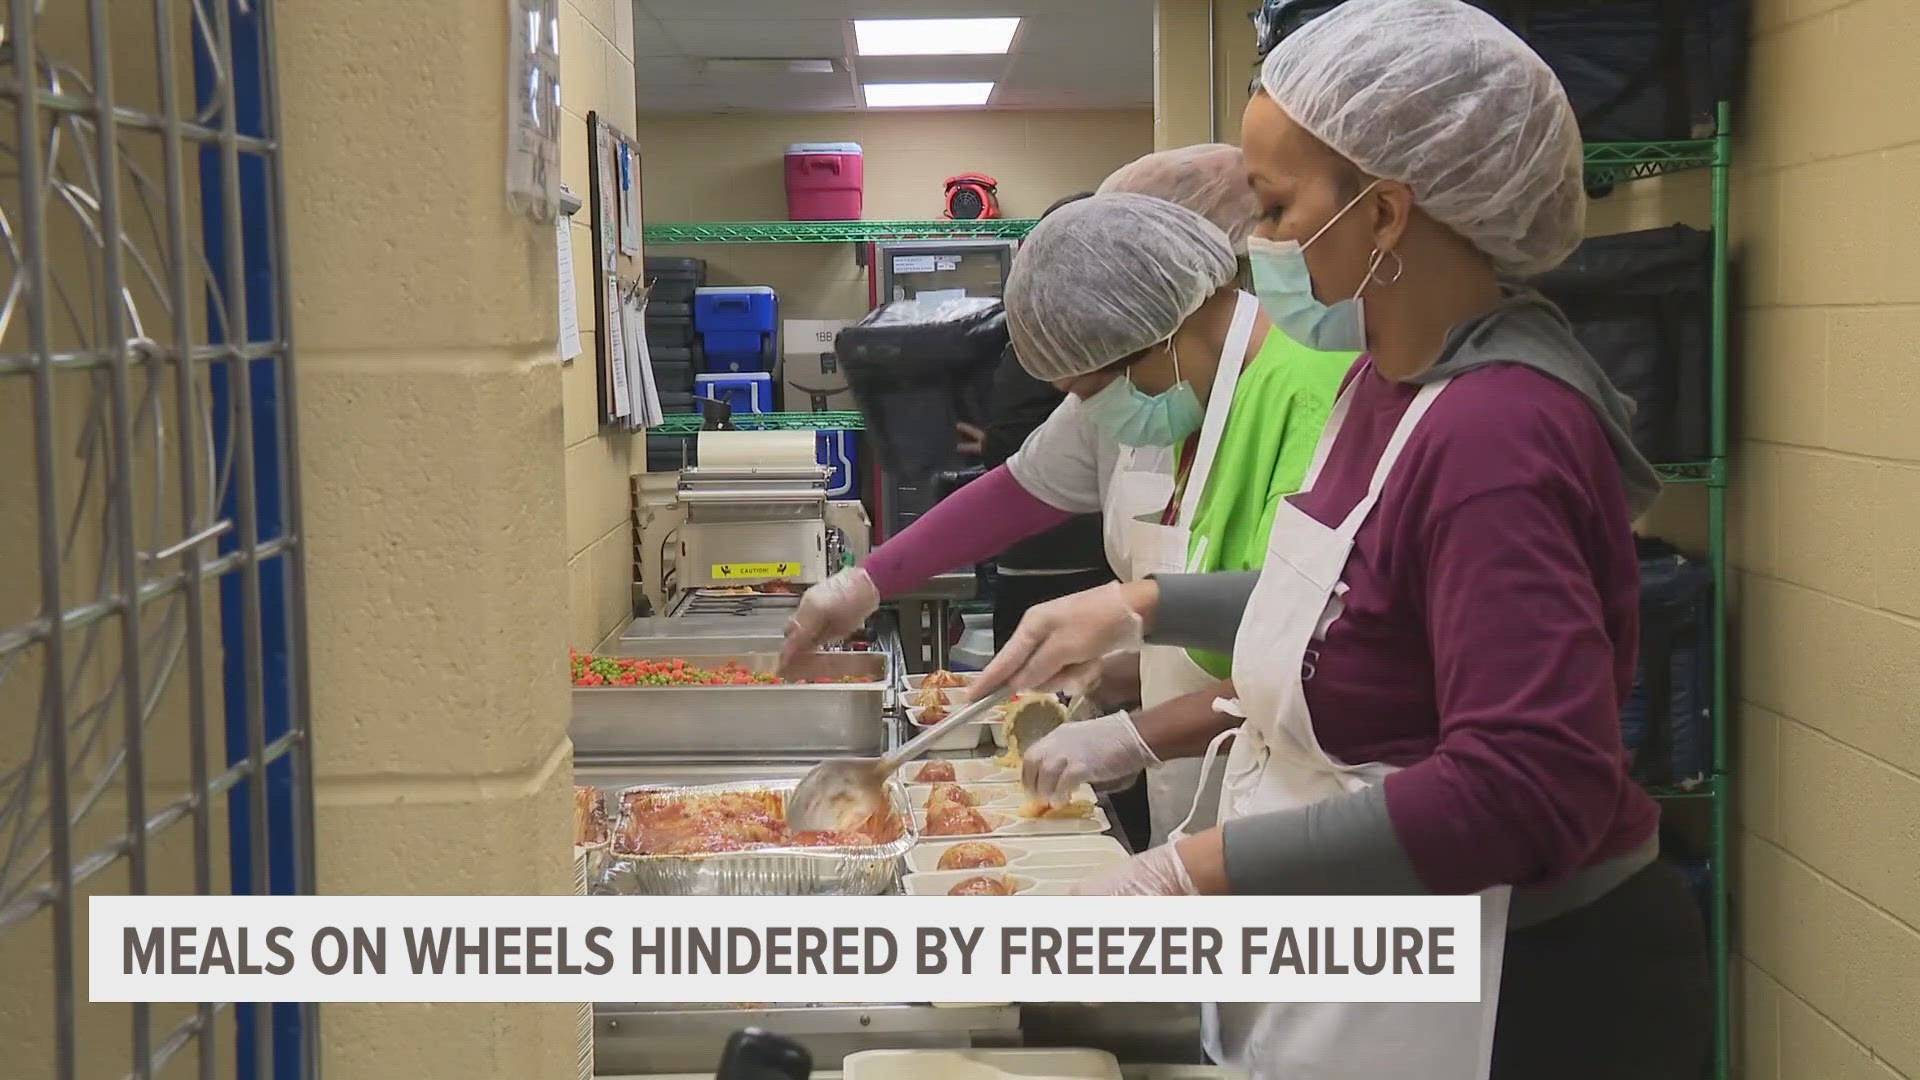 While they don't yet know what caused the freezer failure, they had to throw out all of their frozen food since it was at room temperature for too long and spoiled.